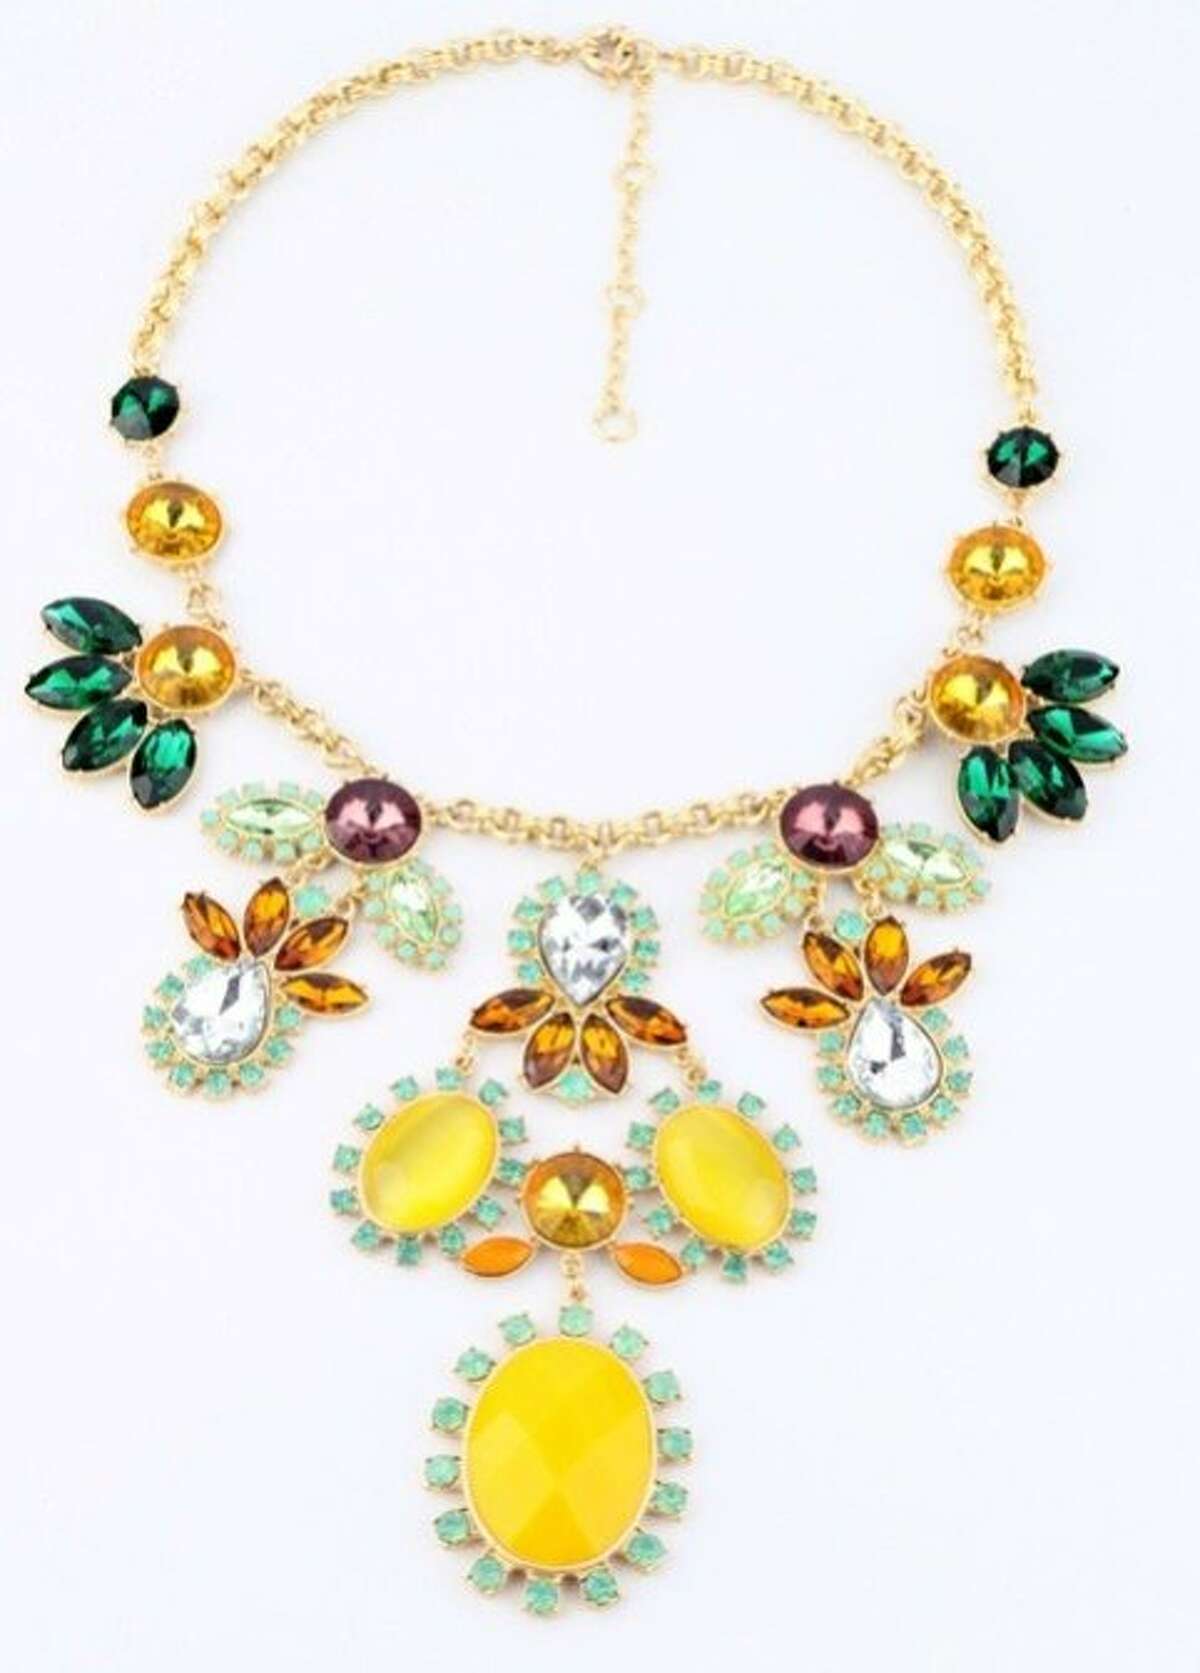 Statement necklaces that leave you speechless